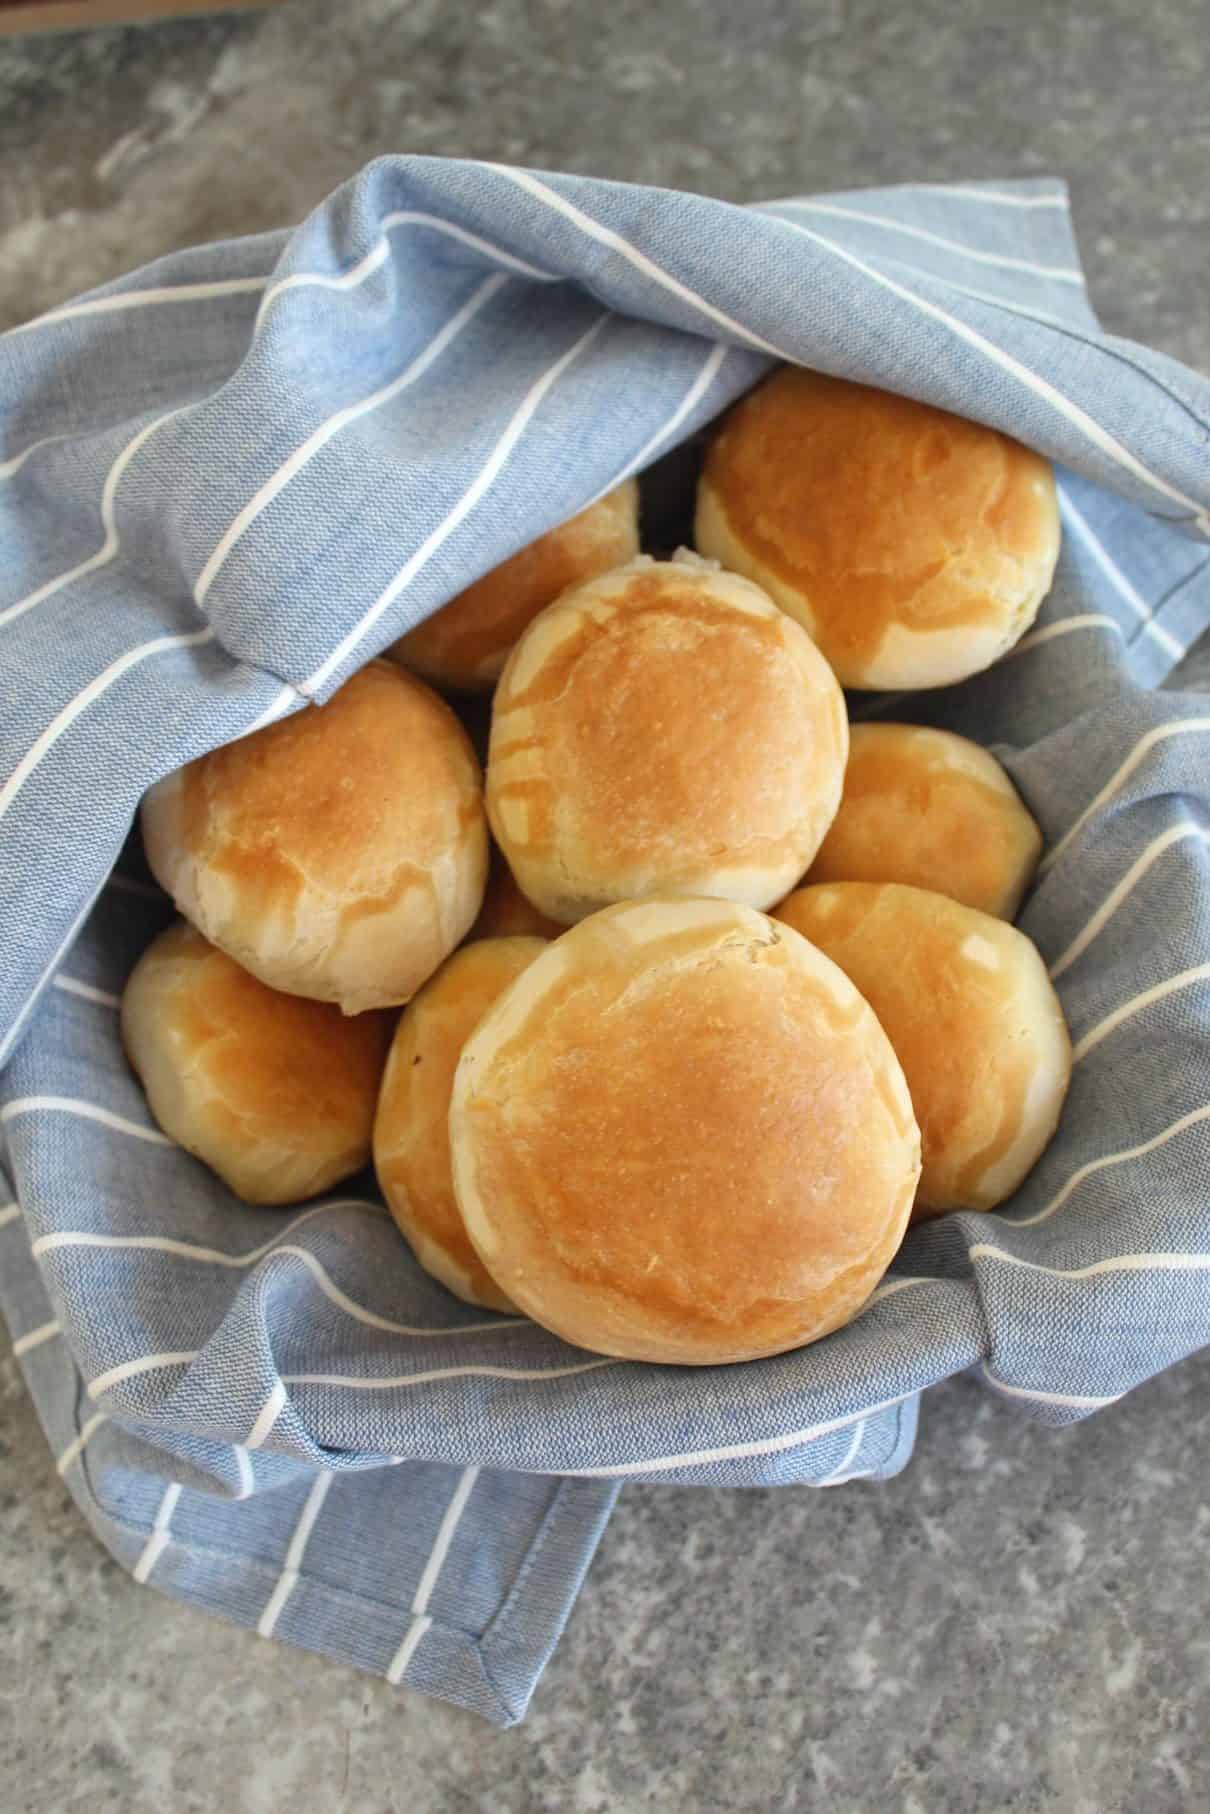 Albanian Home Bread - Bukë shtëpie : picture shows a basket lined with a striped linen. Basket is filled with fresh bread rolls.